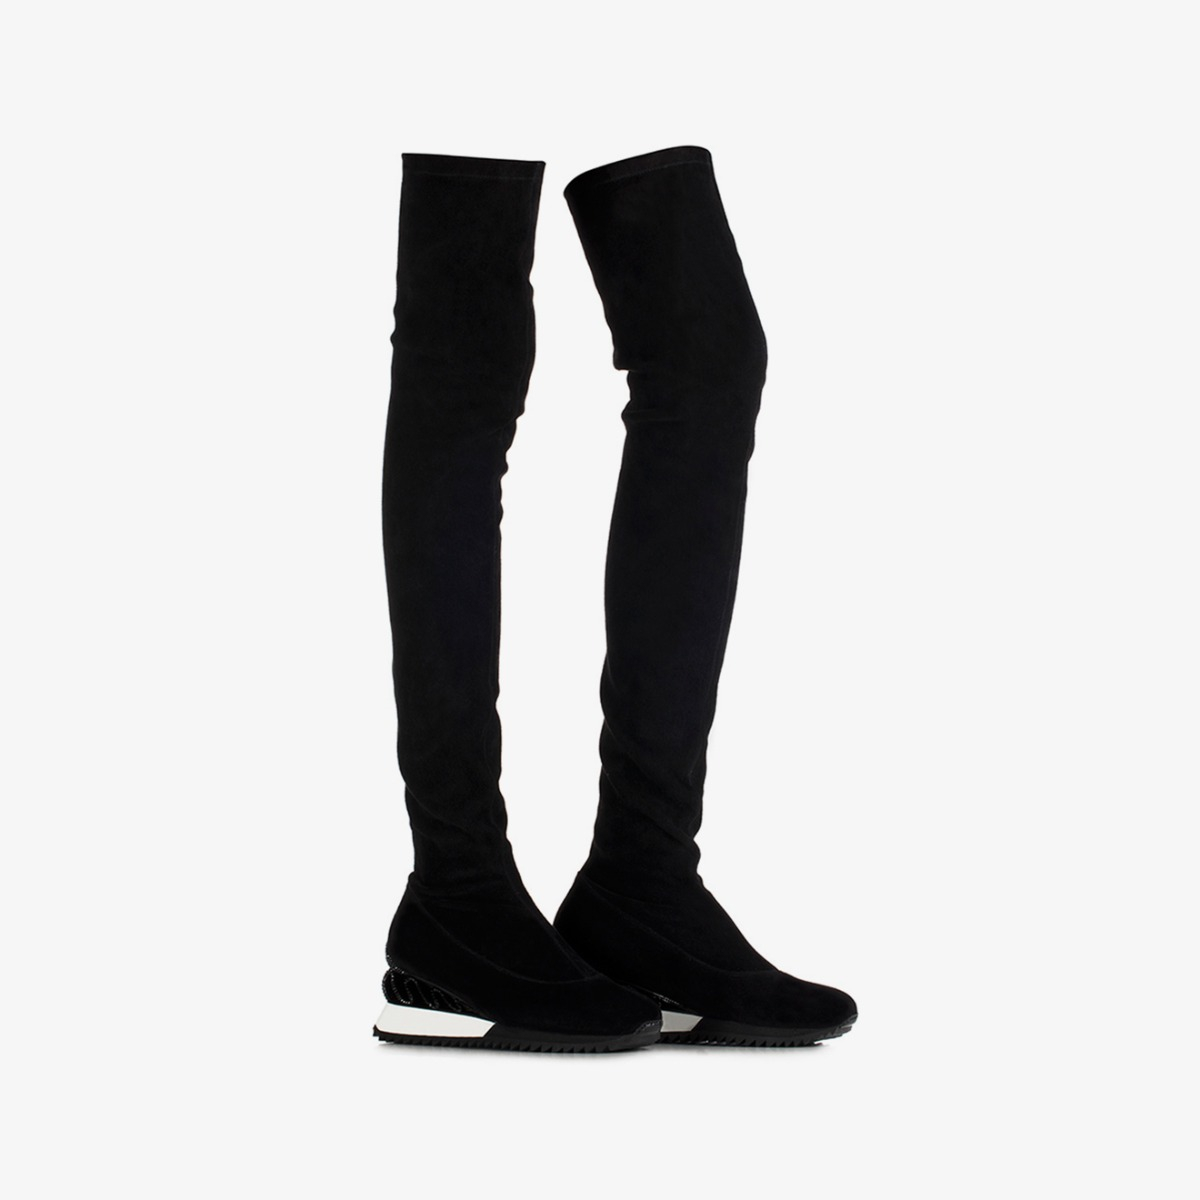 REIKO THIGH-HIGH BOOT 60 mm - Le Silla official outlet